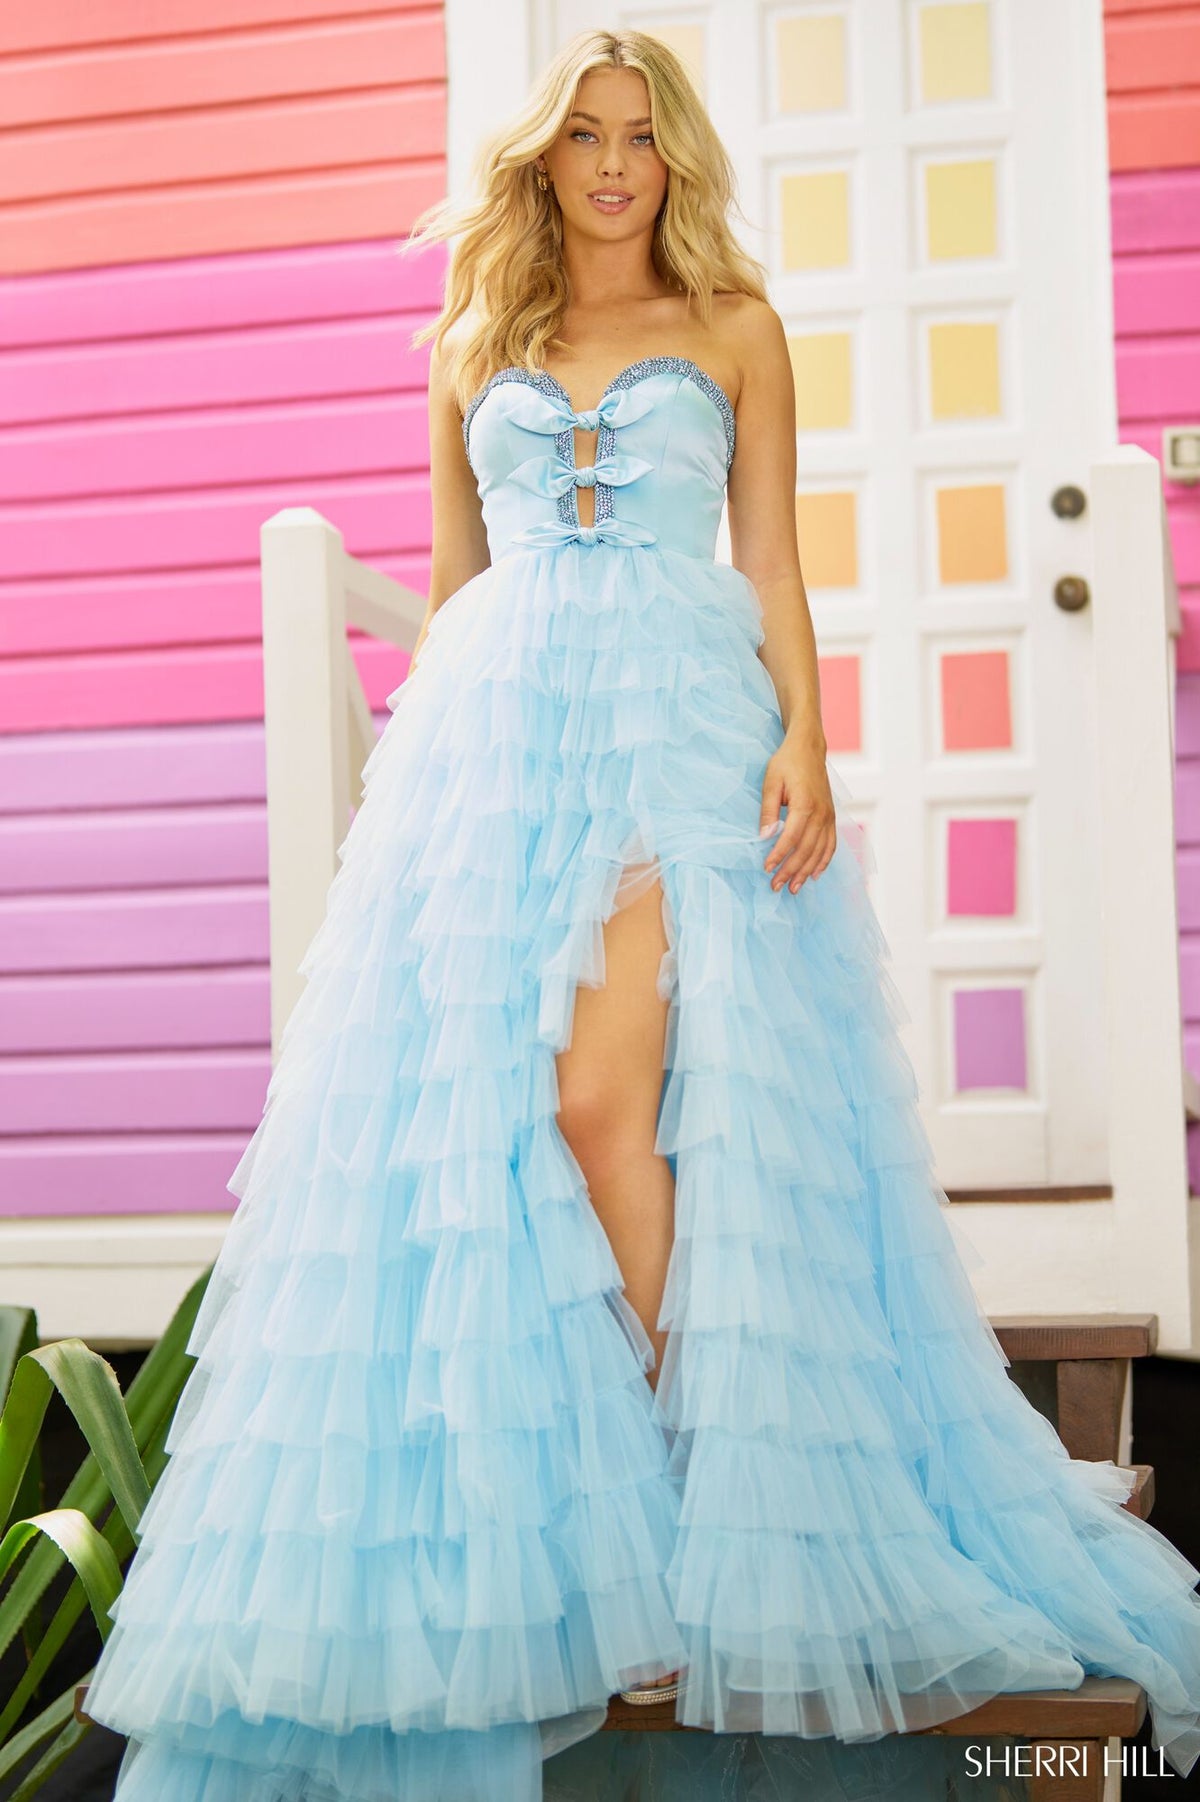 Sherri Hill 56012 Strapless A-line Prom and Quinceañera Gown - An enchanting gown featuring a strapless A-line silhouette, deep V neckline, bow embellishments, and a ruffle skirt with a slit for an elegant and timeless look.